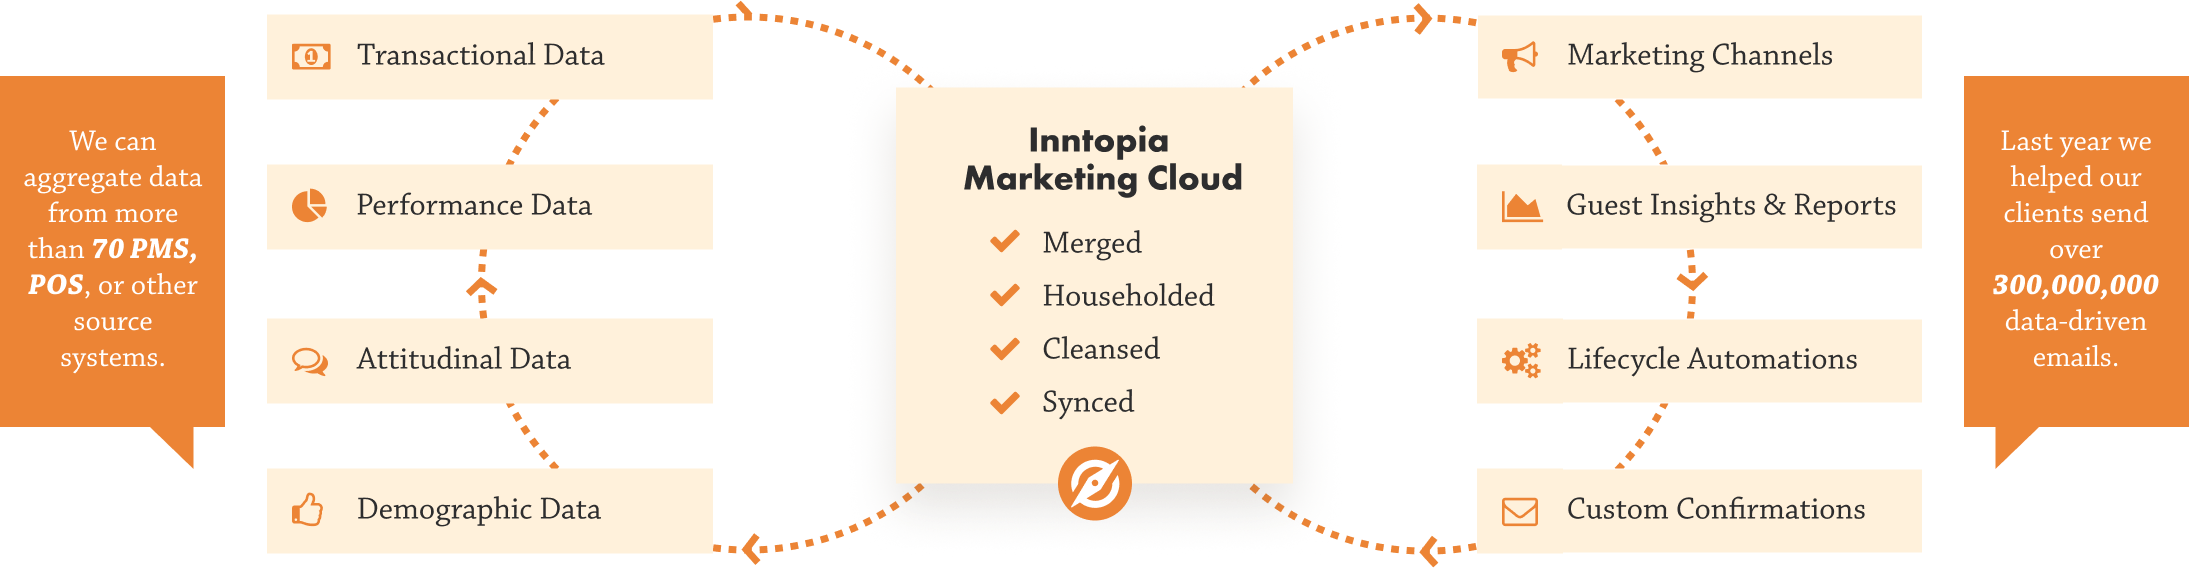 chart showing how data flows through inntopia marketing cloud for hotel email marketing opportunities